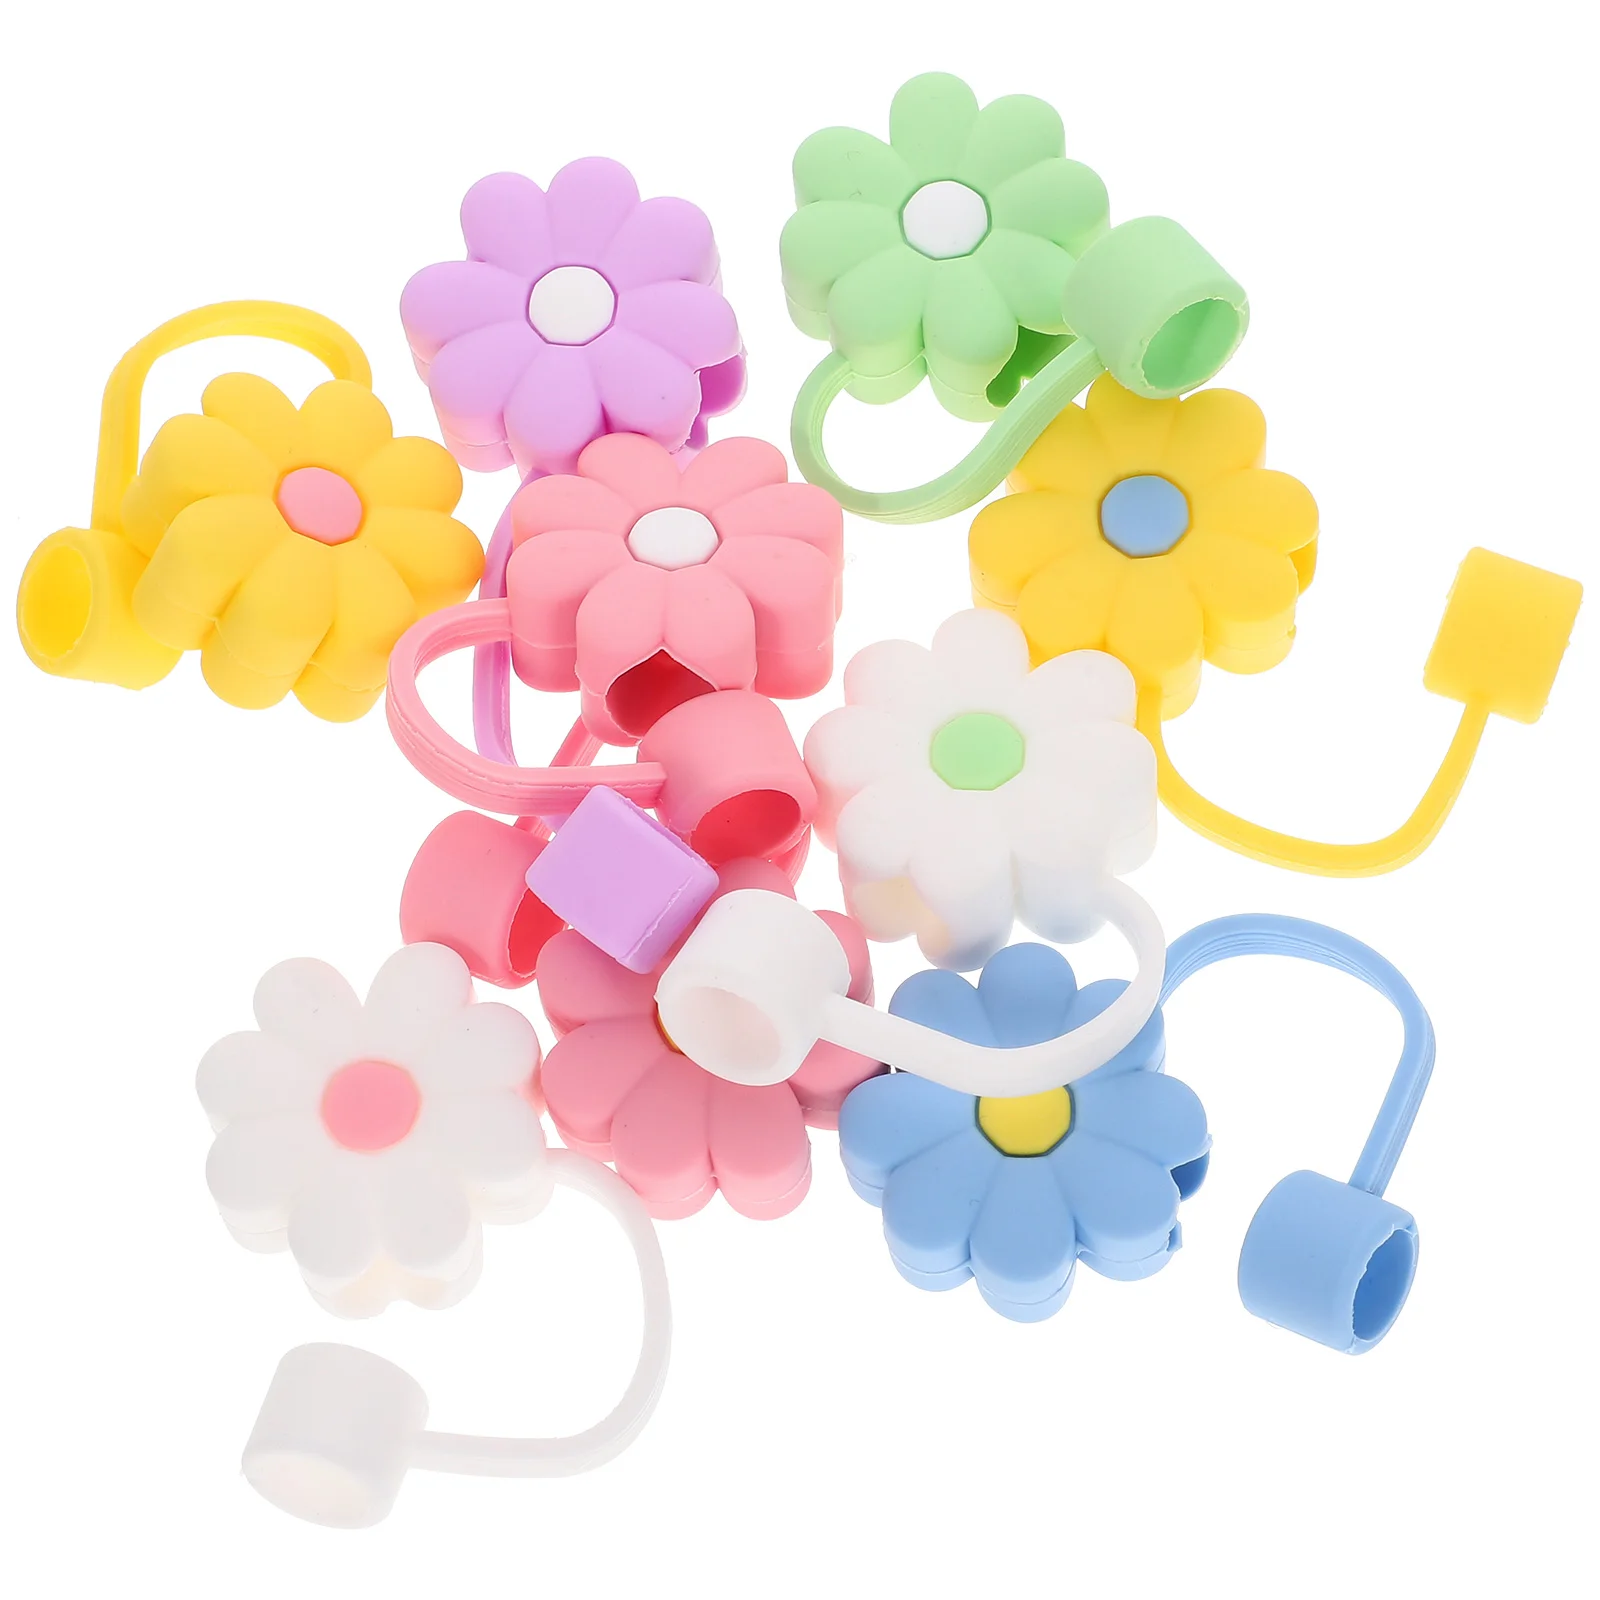 

9 Pcs Silicone Straw Cap Bathroom Decorations Drinking Caps Cover Reusable Covers Silica Gel Toppers Cute